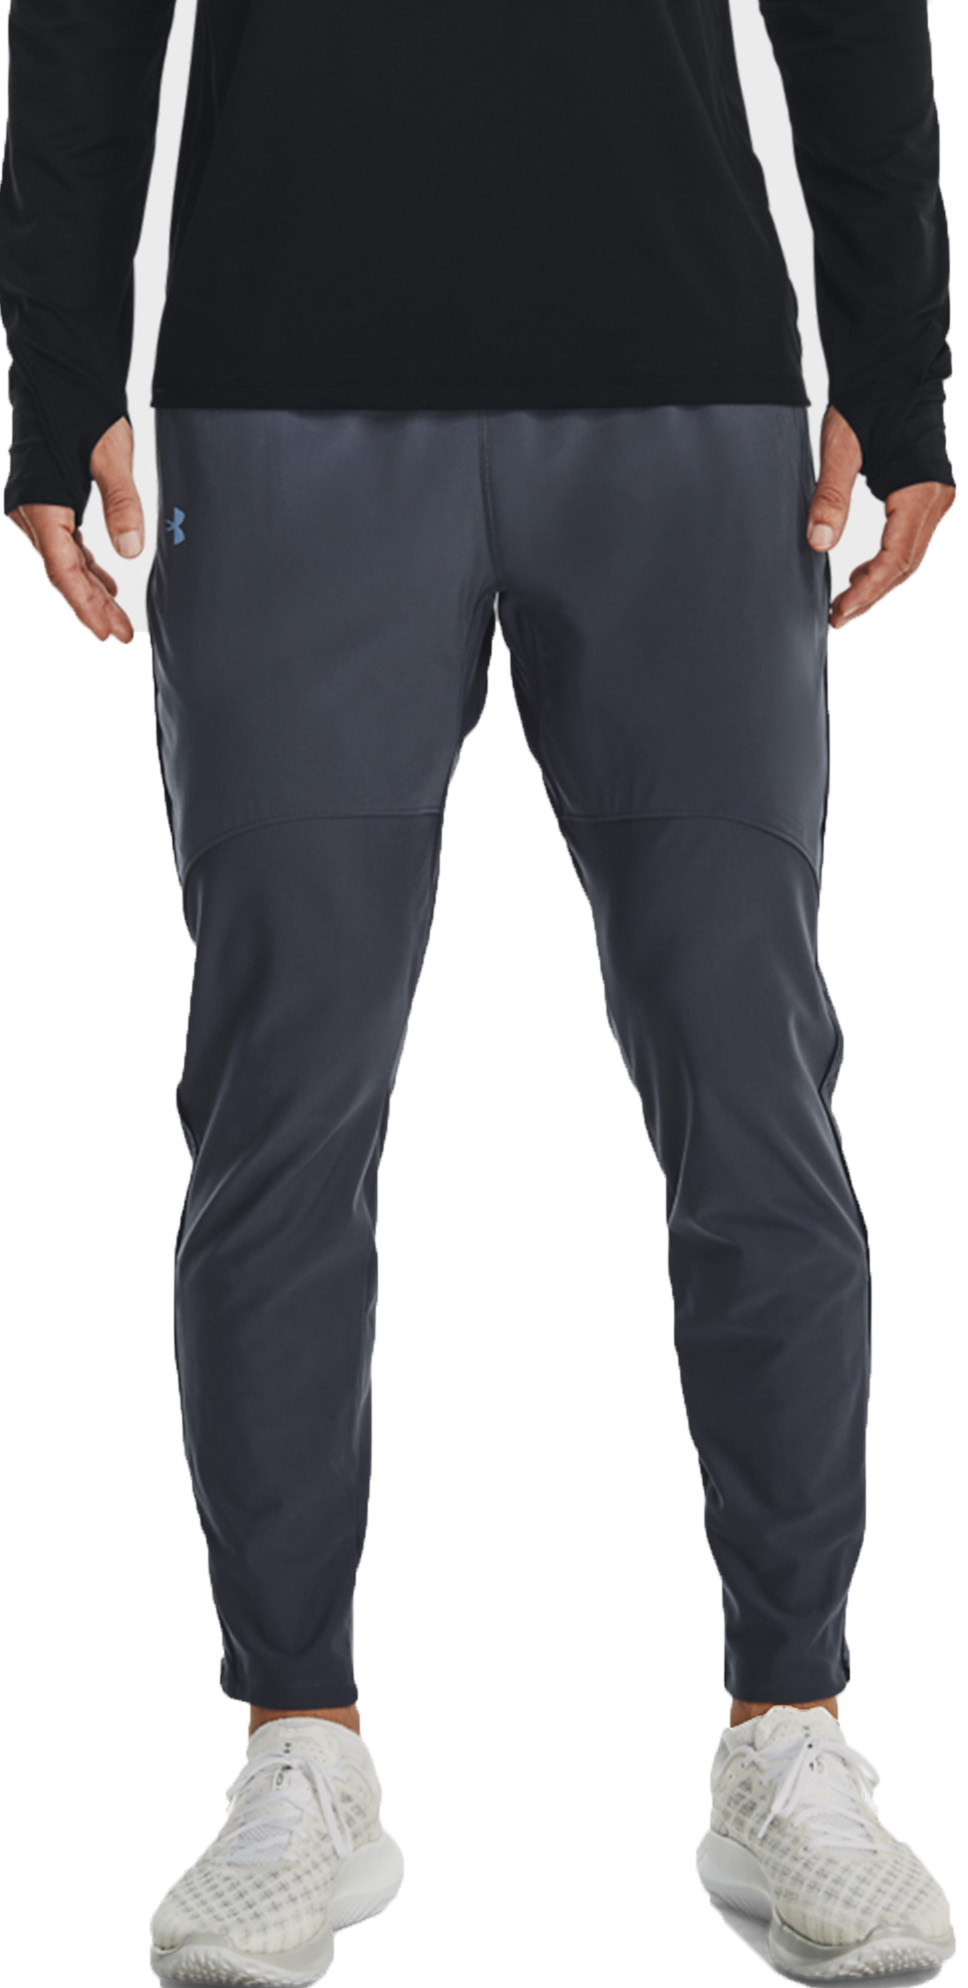 https://i1.t4s.cz/products/1366271-044/under-armour-ua-qualifier-run-2-0-pant-gry-561678-1366271-044.jpg